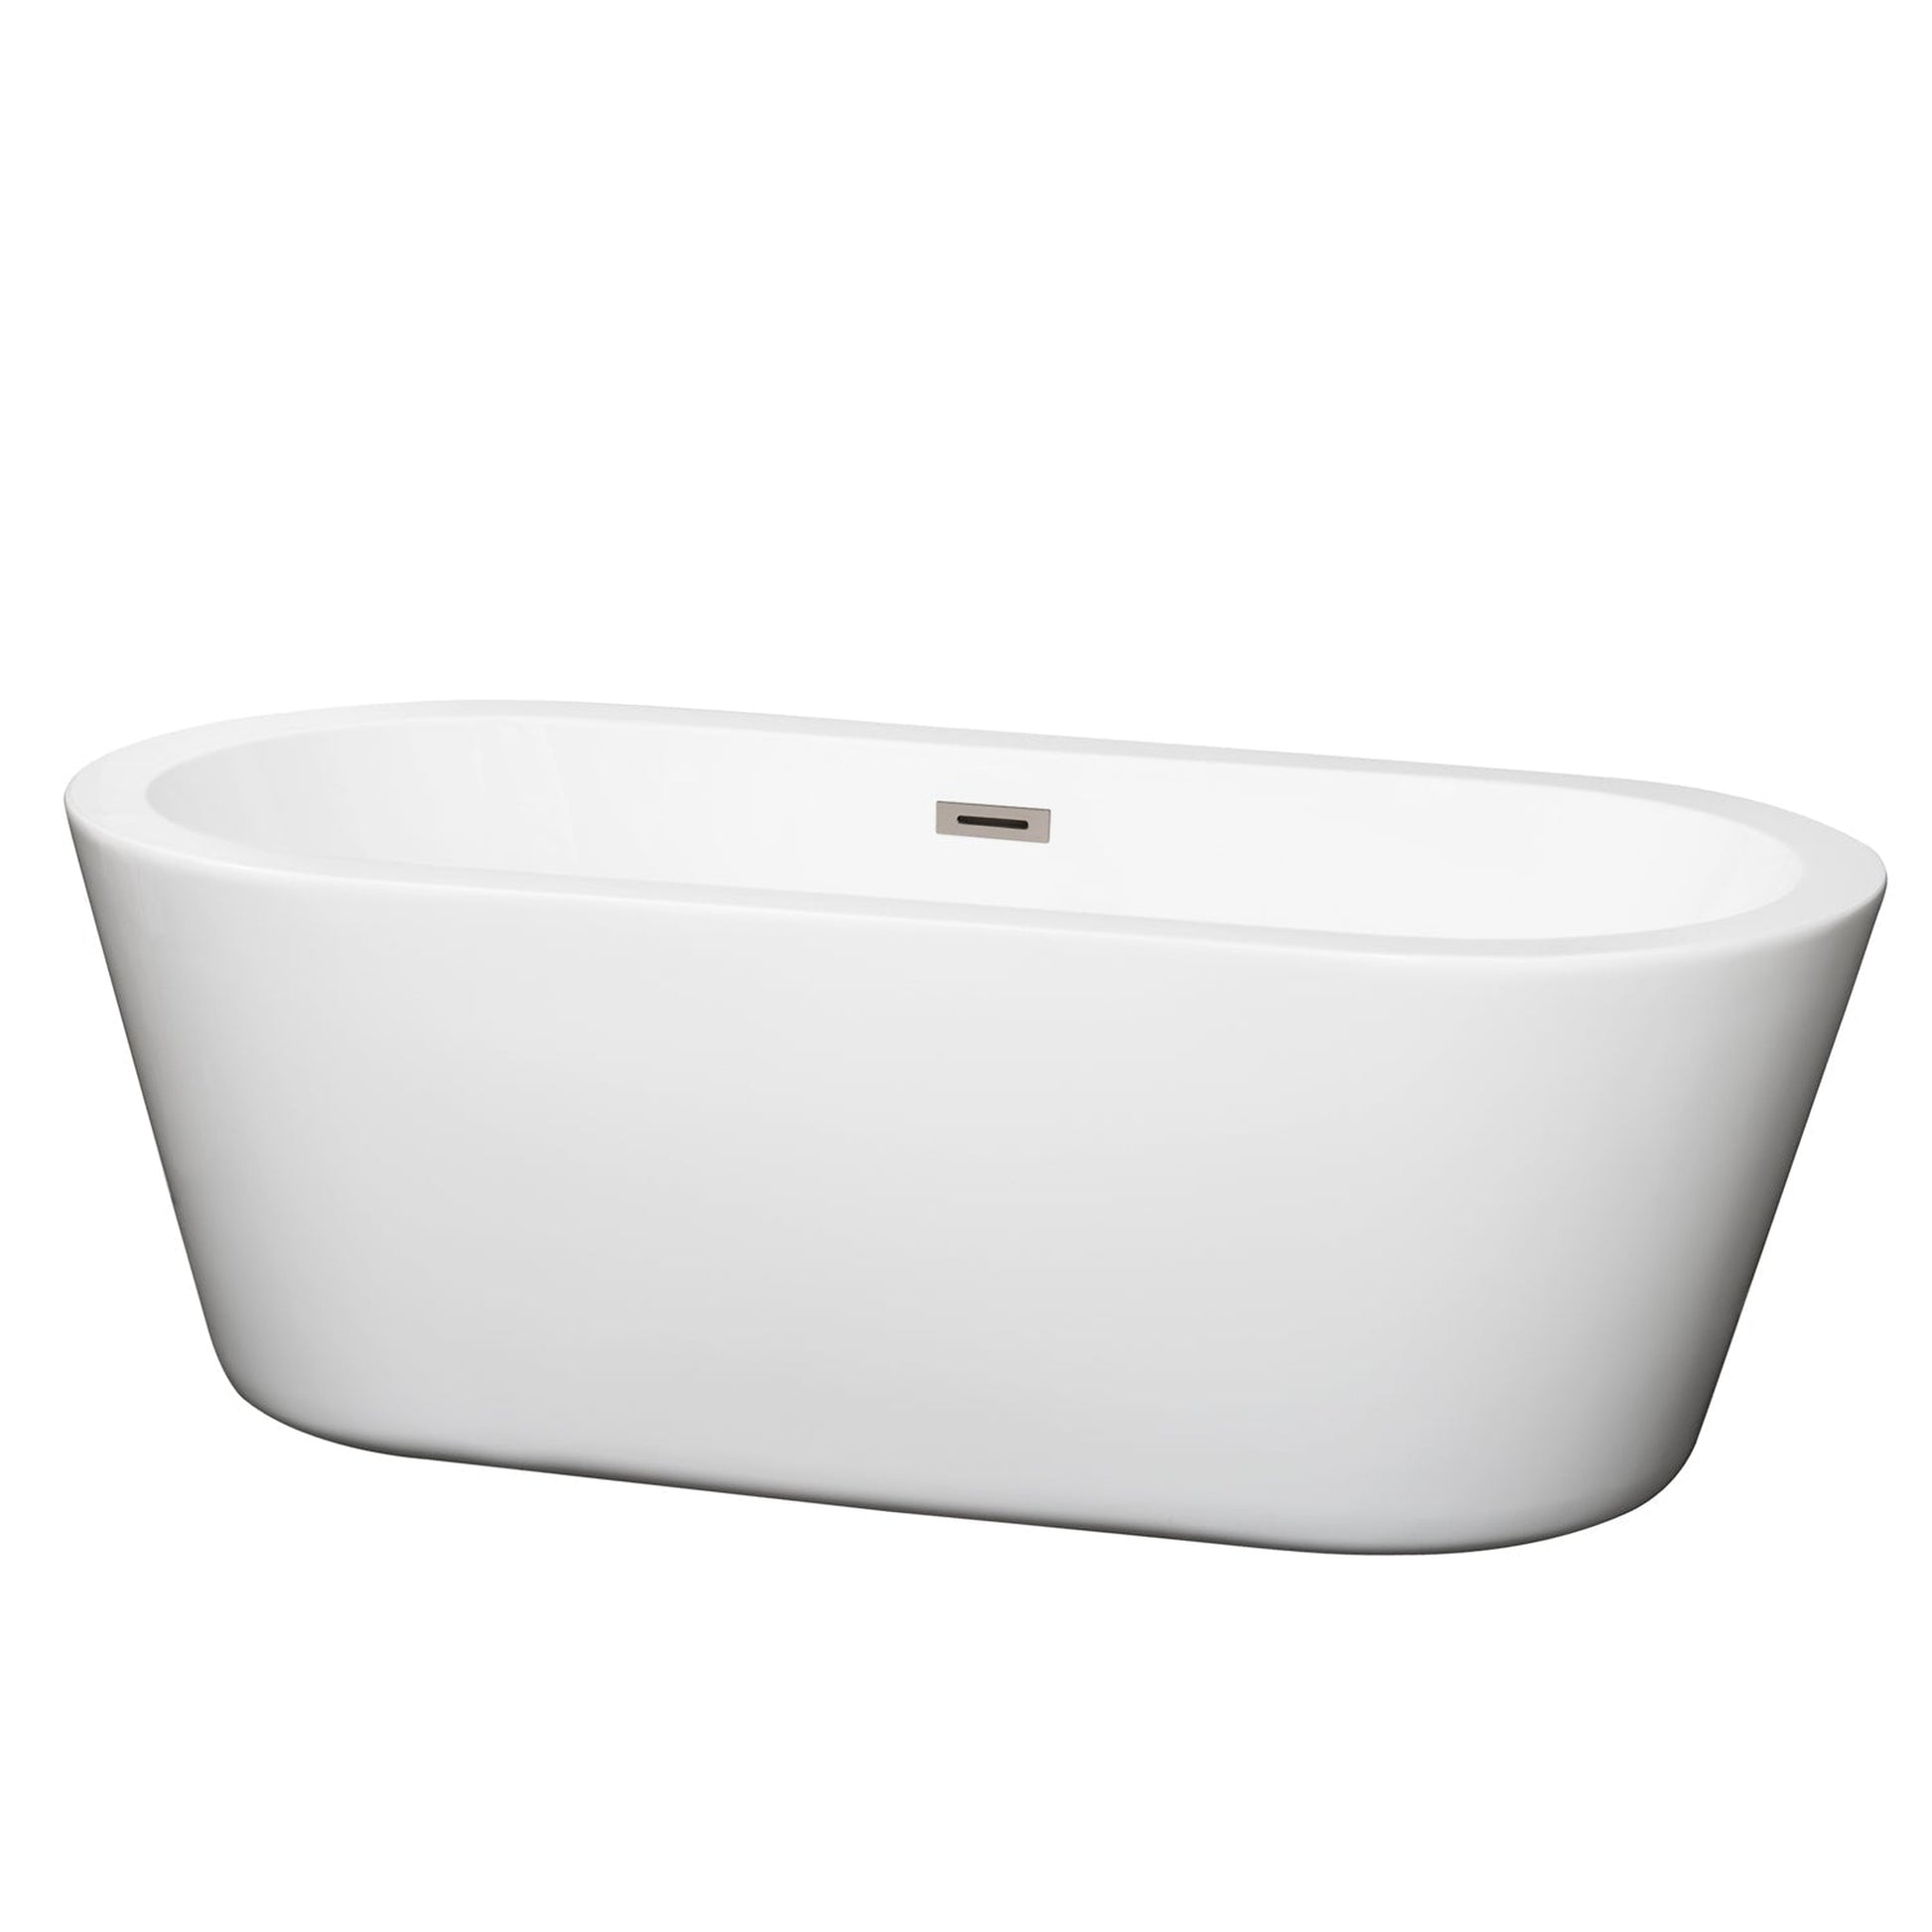 Wyndham Collection Mermaid 67" Freestanding Bathtub in White With Brushed Nickel Drain and Overflow Trim